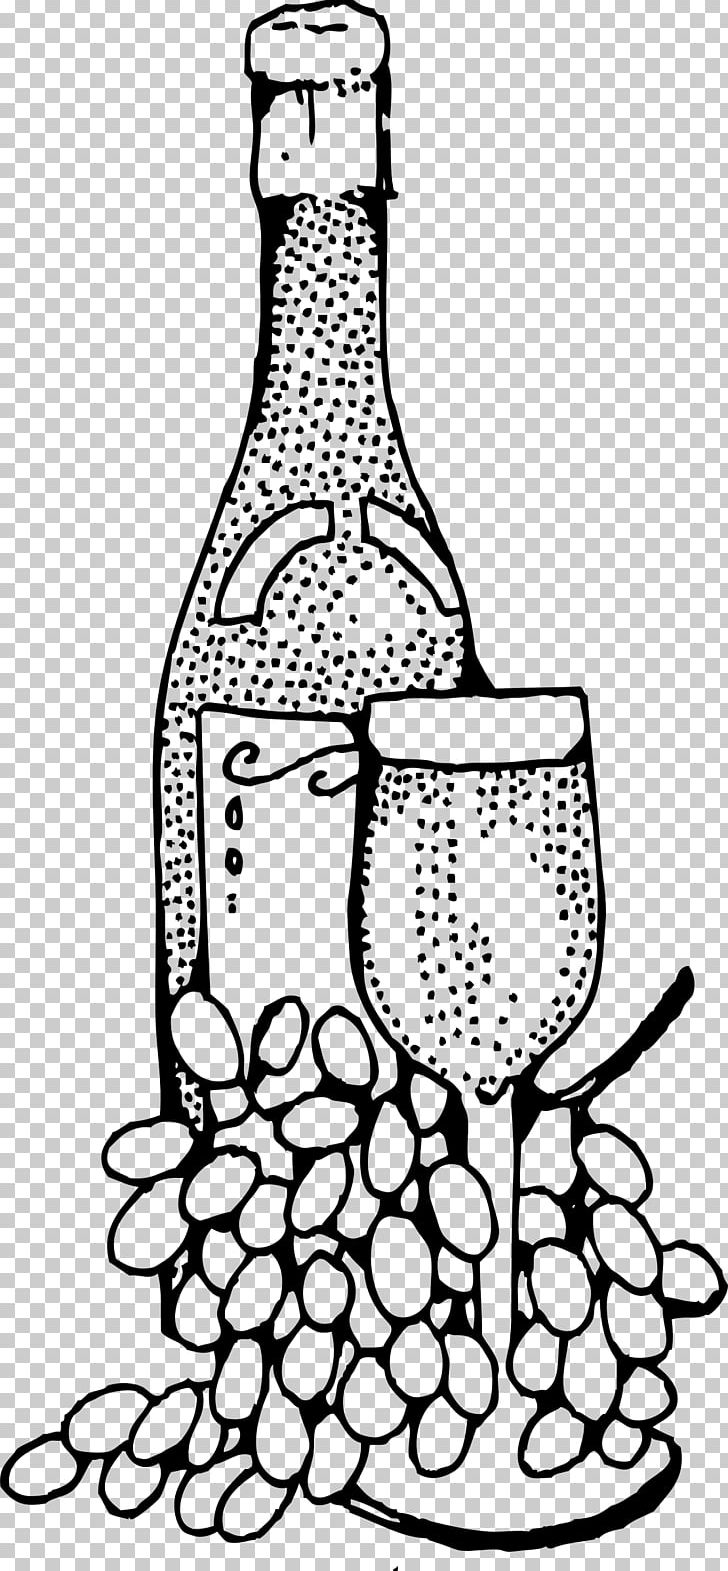 Wine Bottle Ready-to-Use Food And Drink Spot Illustrations PNG, Clipart, Beer, Black And White, Bottle, Drawing, Drinkware Free PNG Download